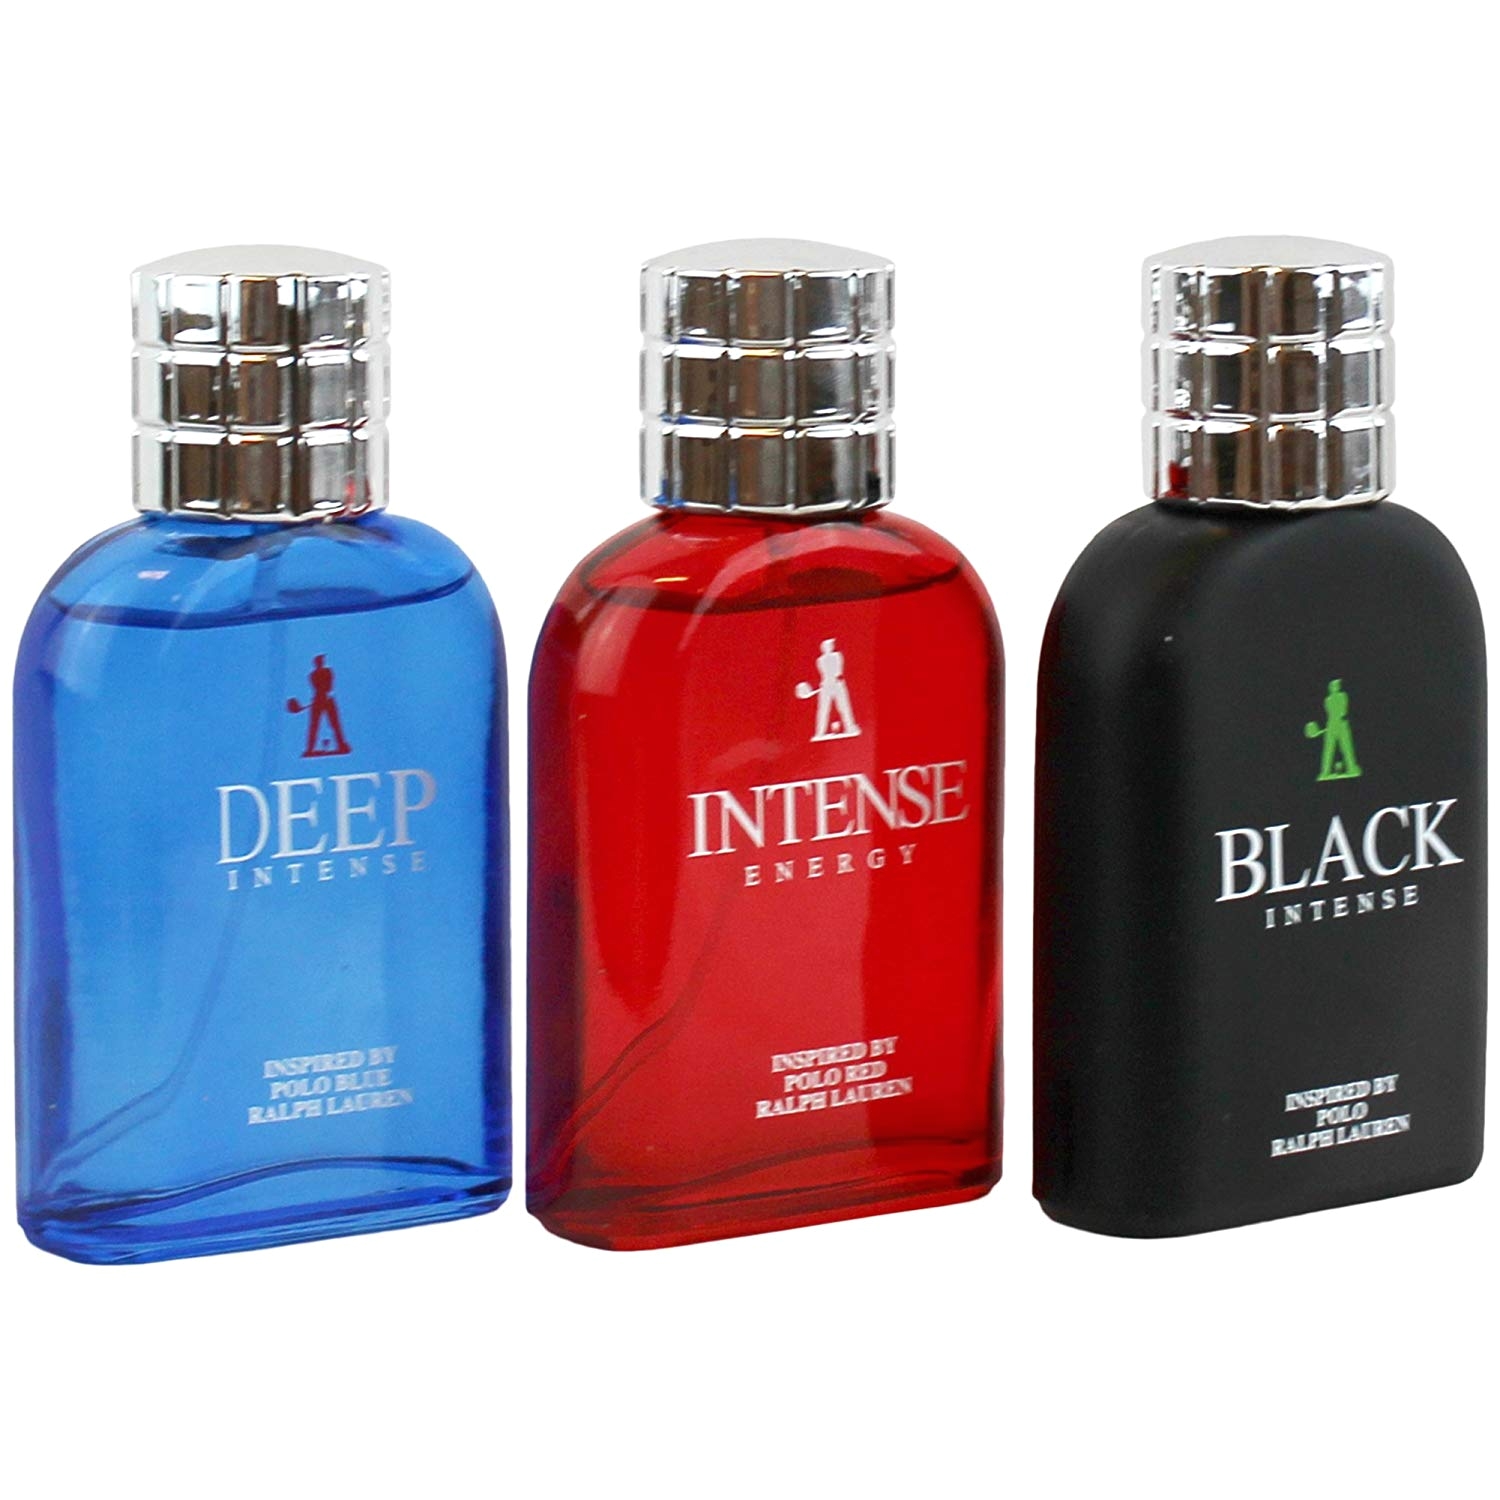 amazon com intense 3 piece fragrance gift set for men inspired by black blue red cologne 1 7 fl oz 50 ml each beauty